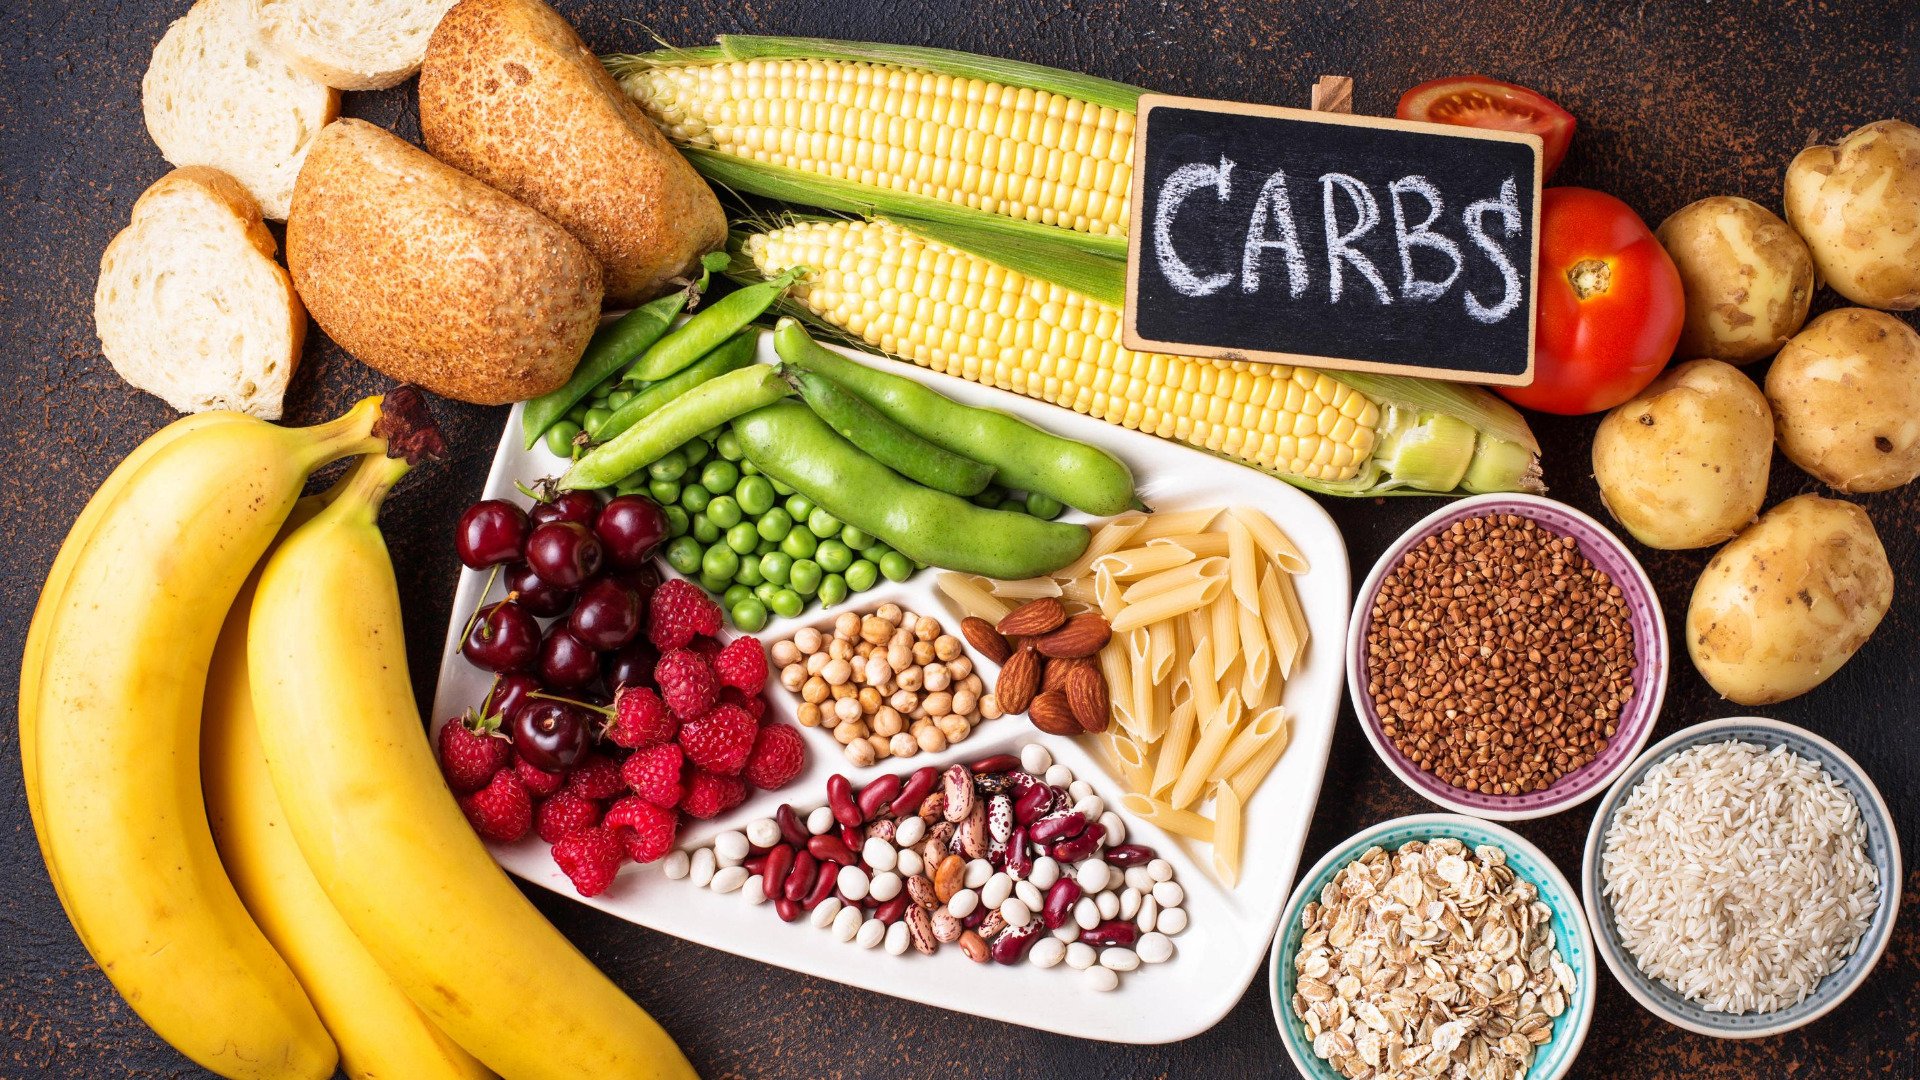 Are Low Carbohydrate Bodybuilding Diets An Effective Muscle Building Tool?